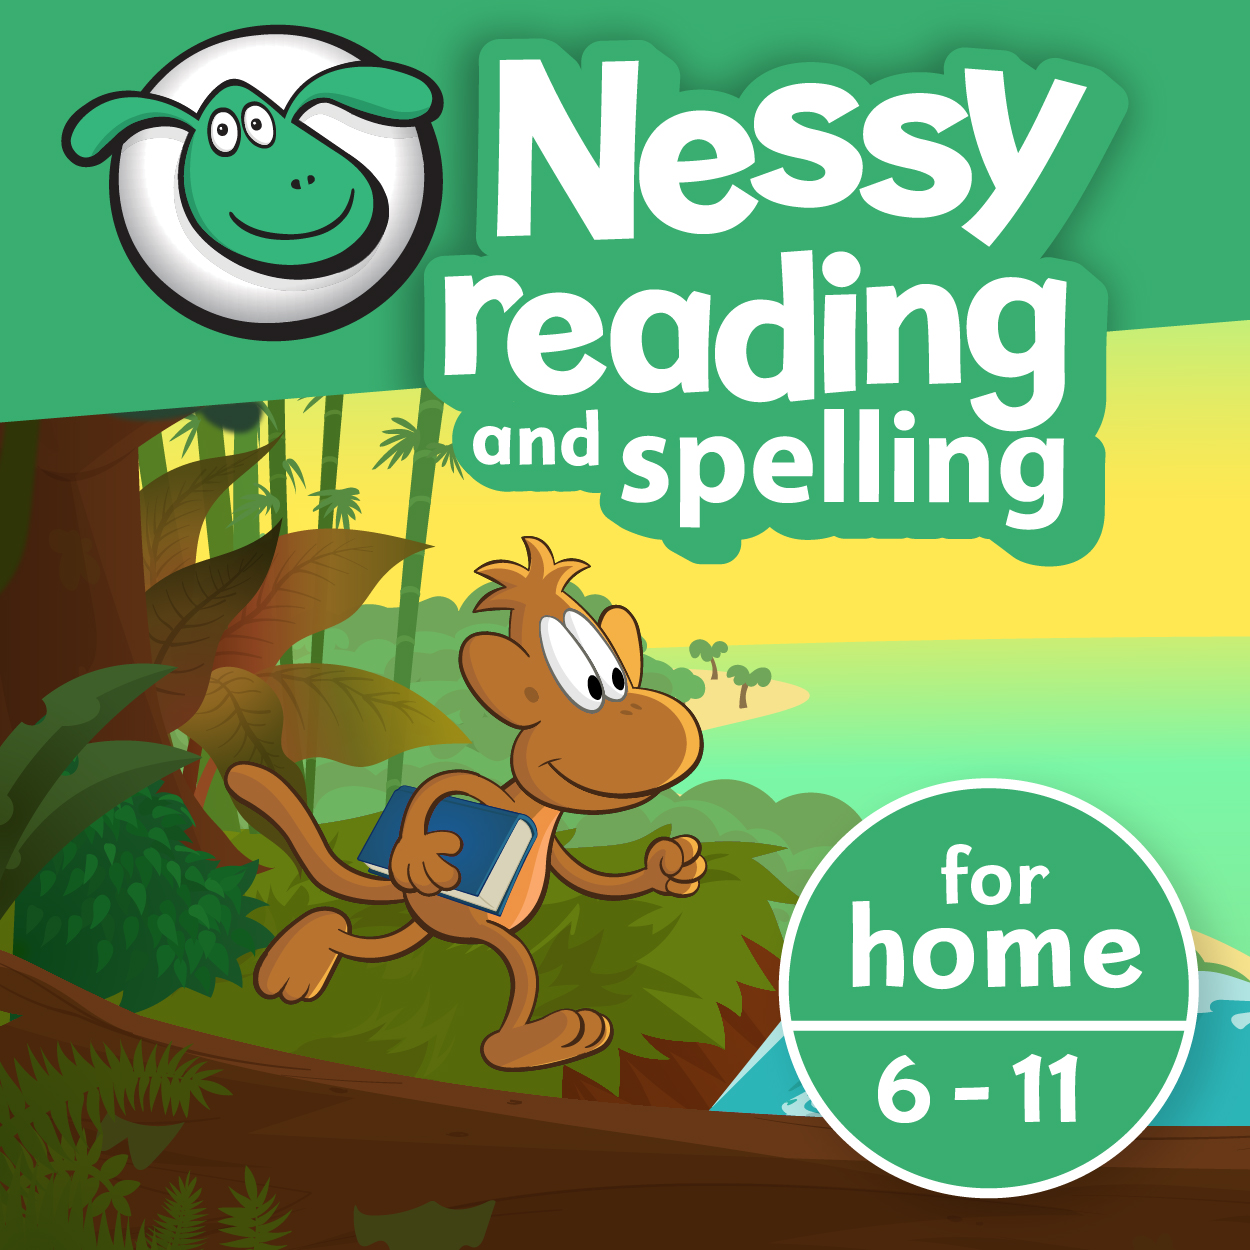 Nessy Reading and Spelling for home